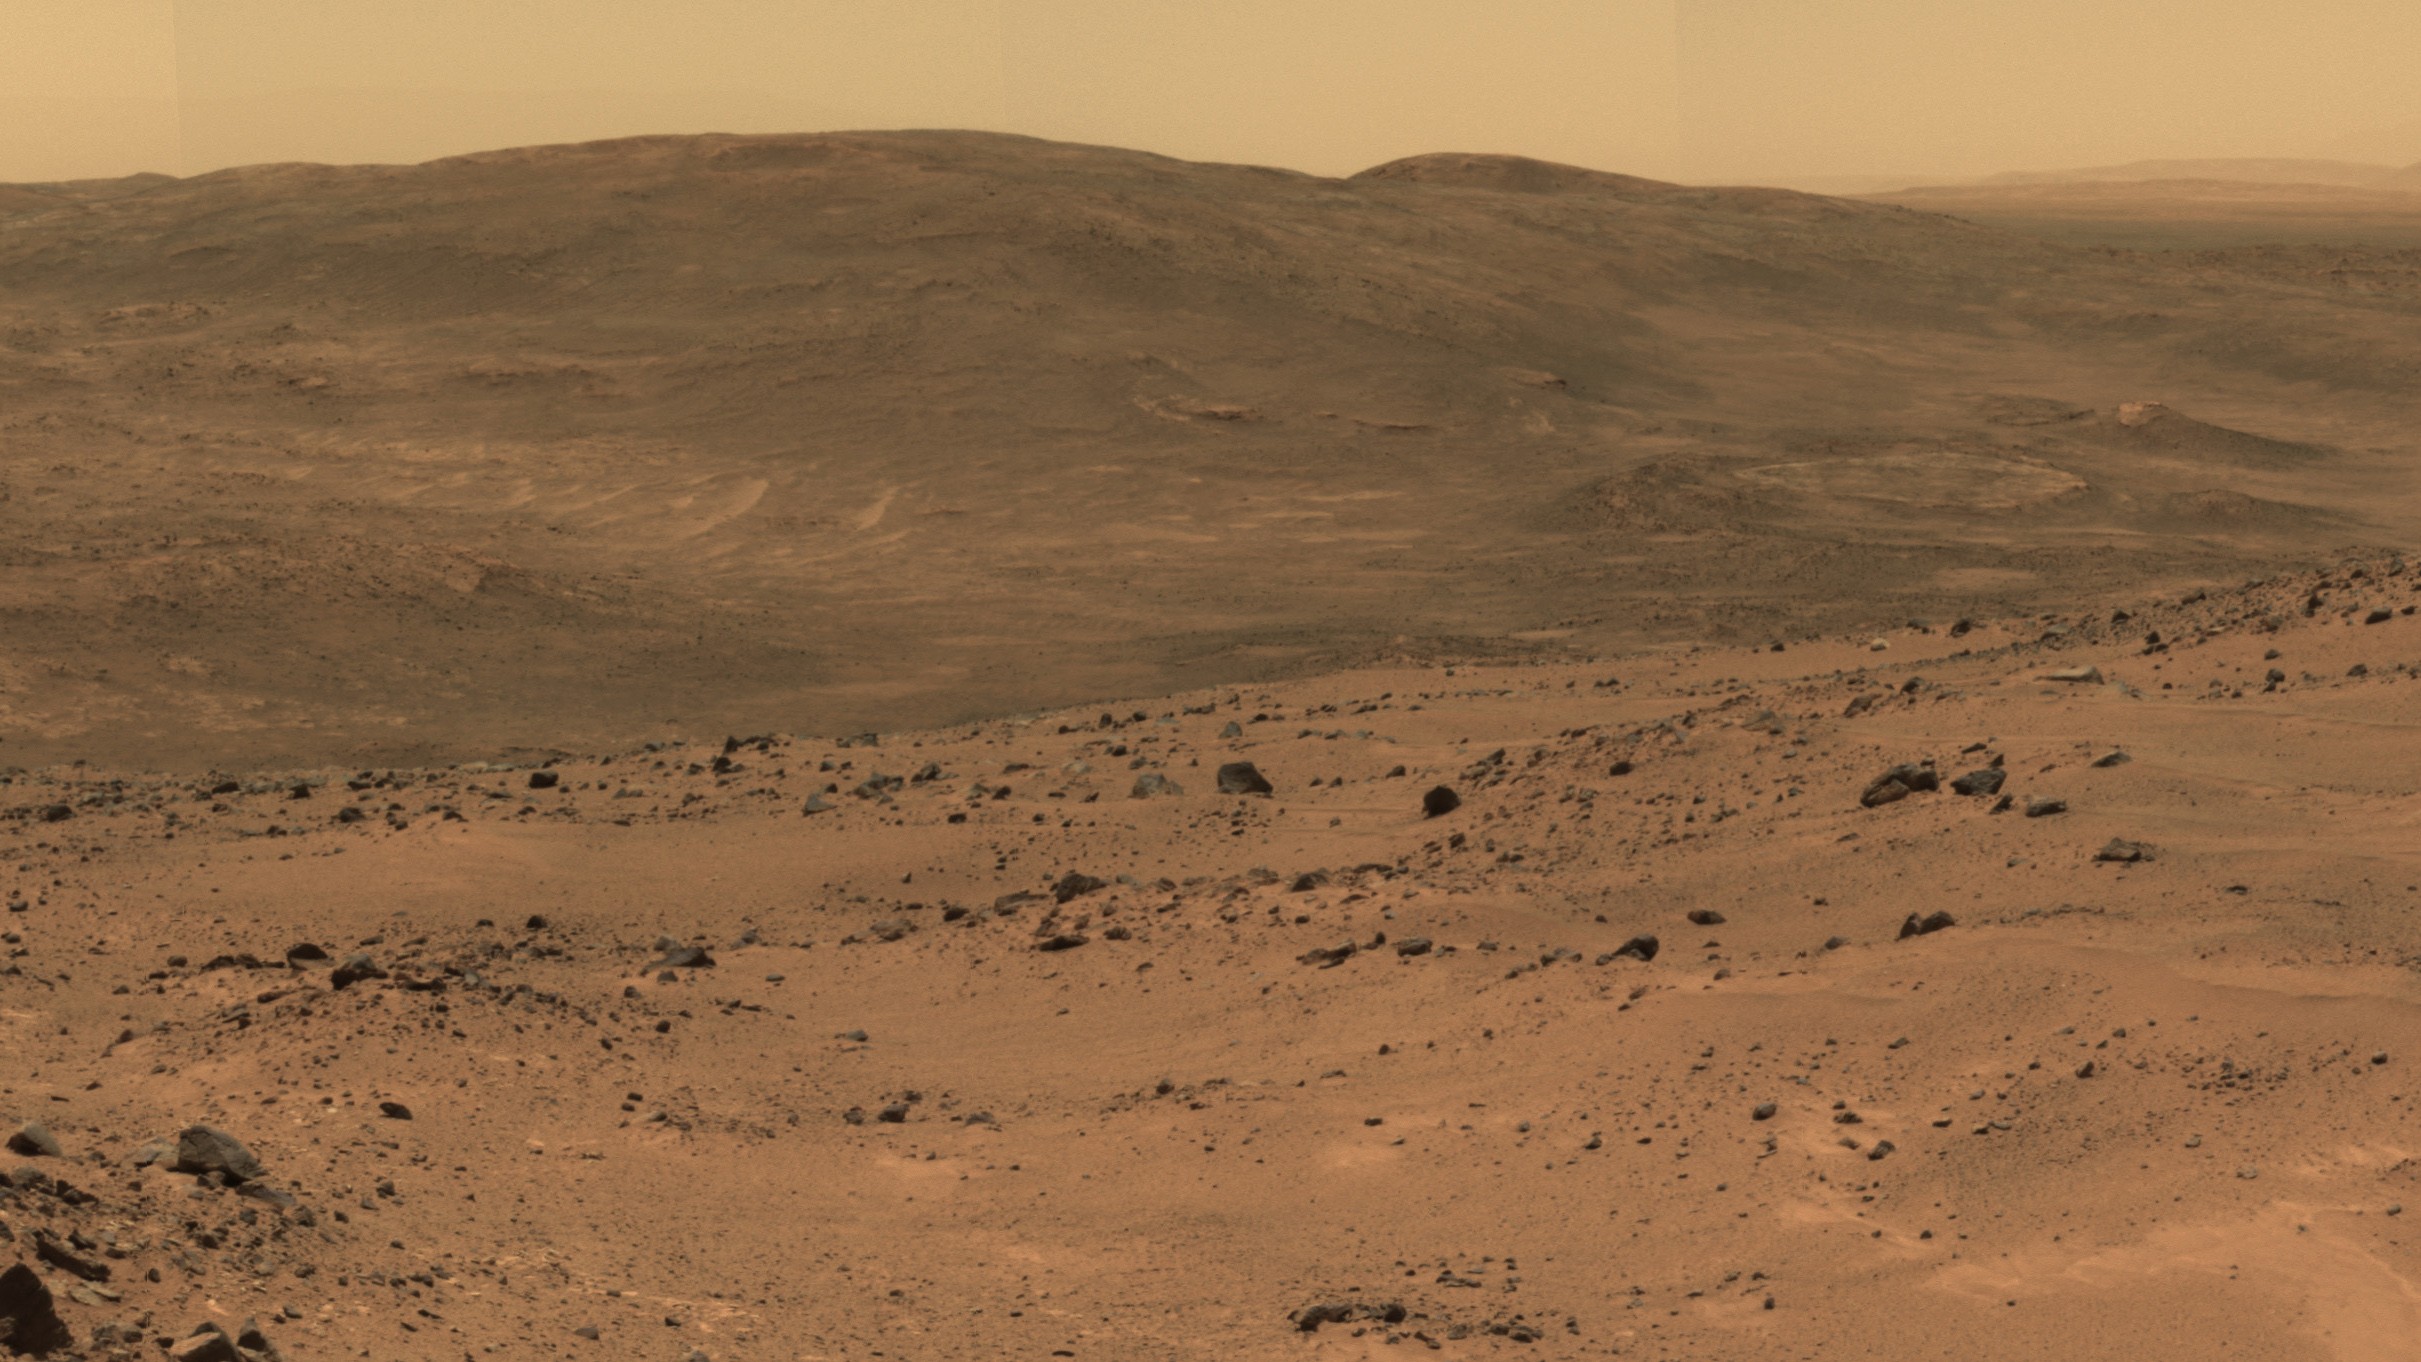 Mars landscape as seen from the Curiosity Rover